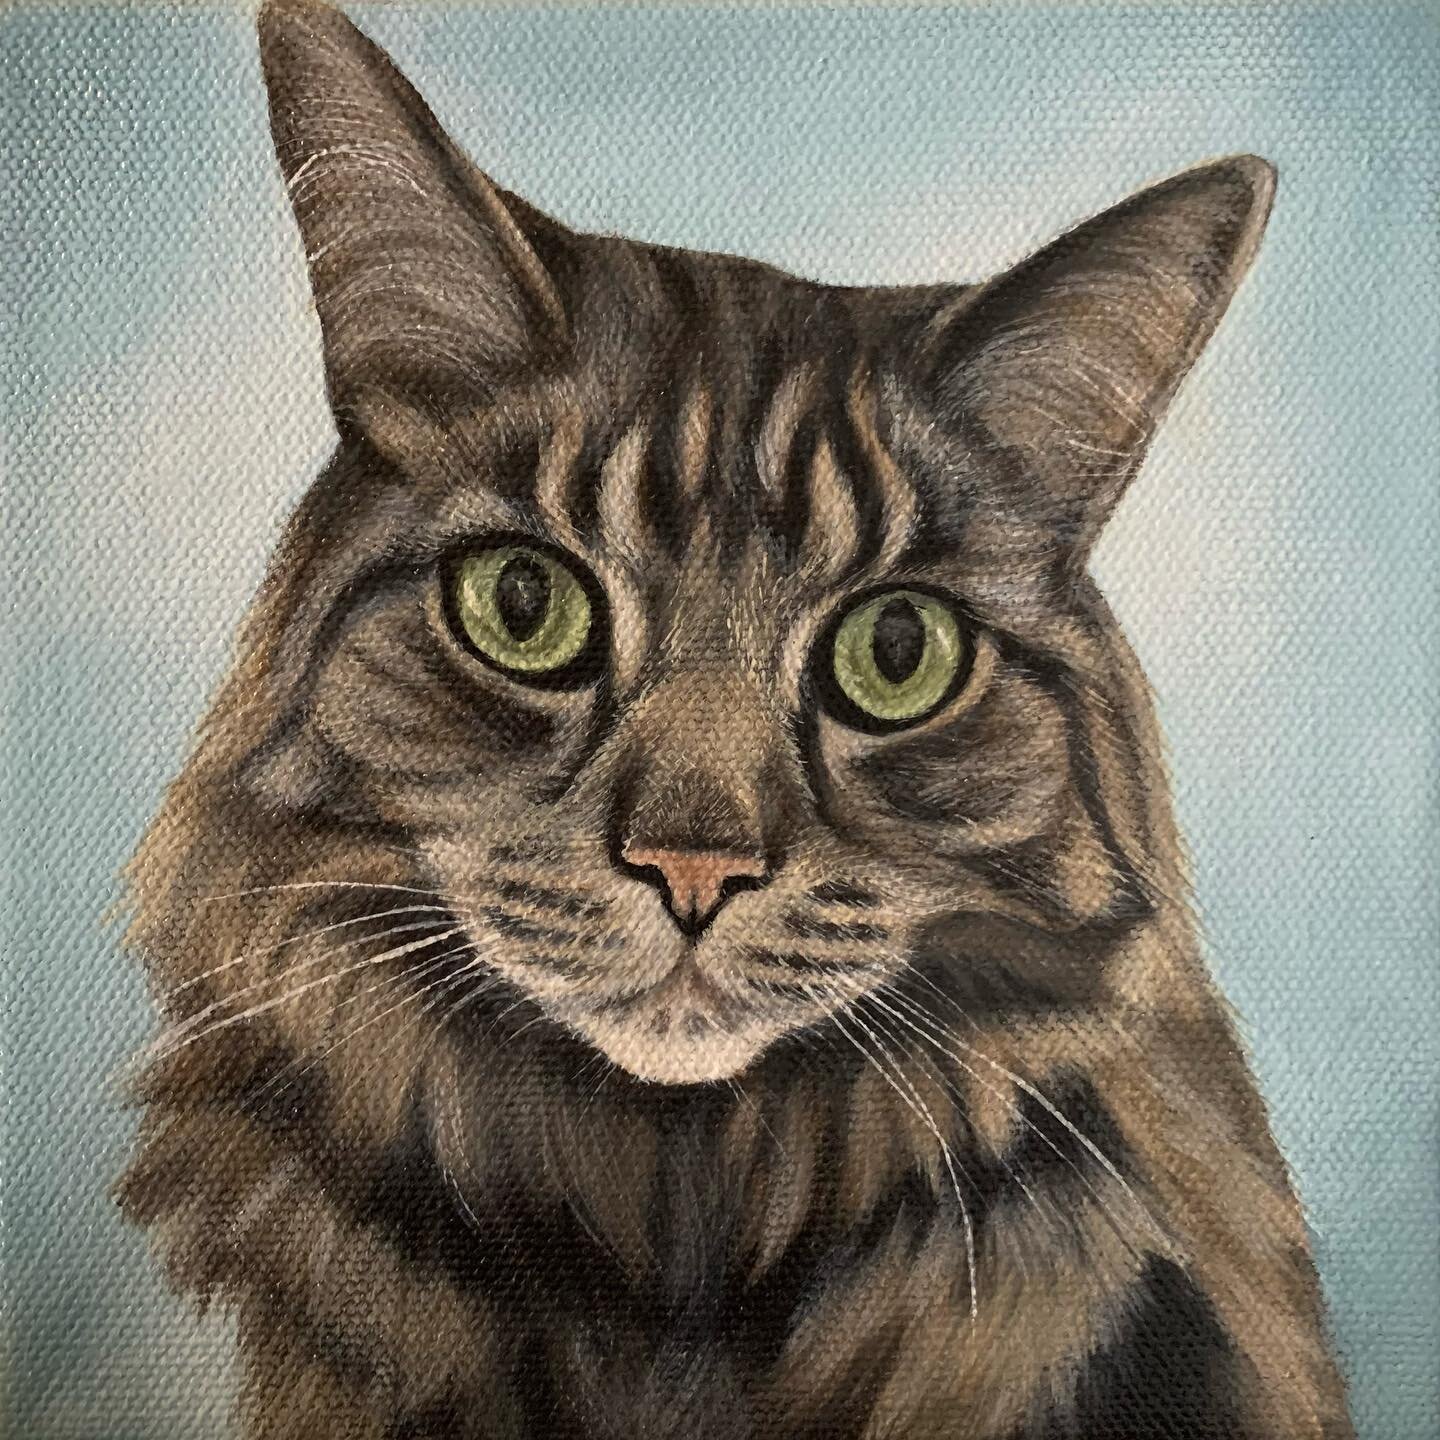 💚Michael Finnegan💚

Cats are beautiful. #catsofinstagram #catpainting #catlover #cats #acrylicpainting